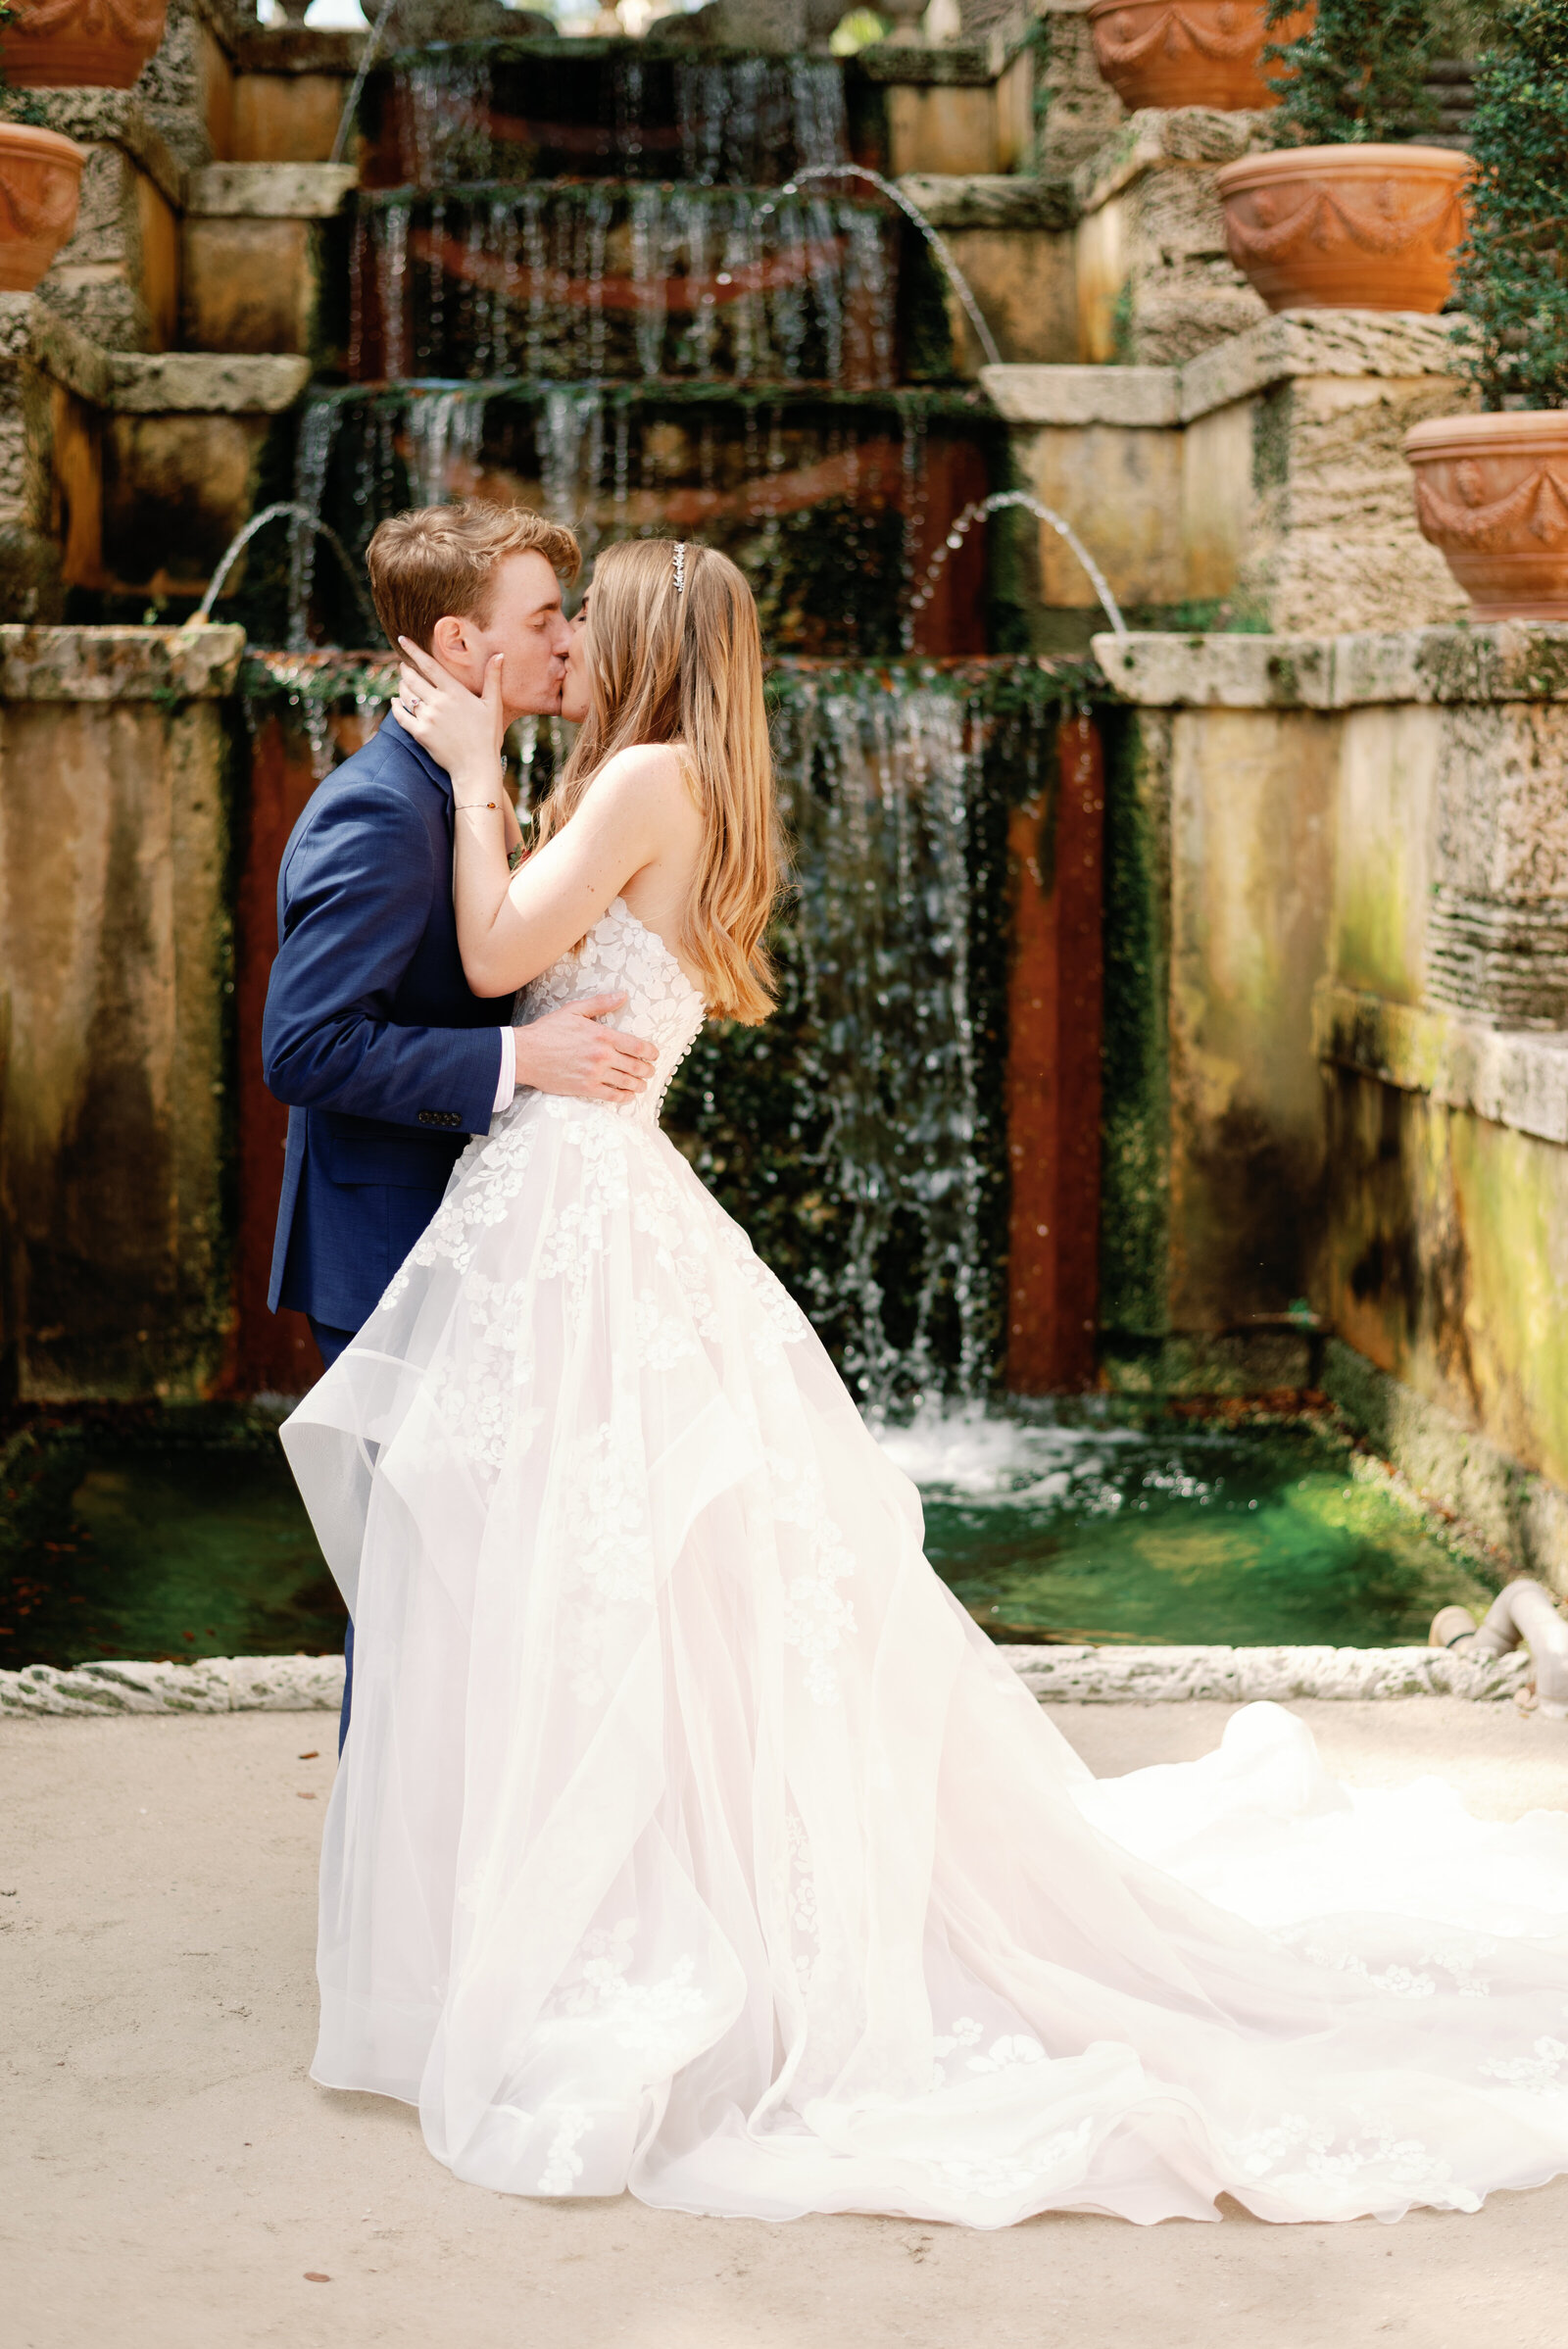 Bride and grooms first kiss after saying their vows